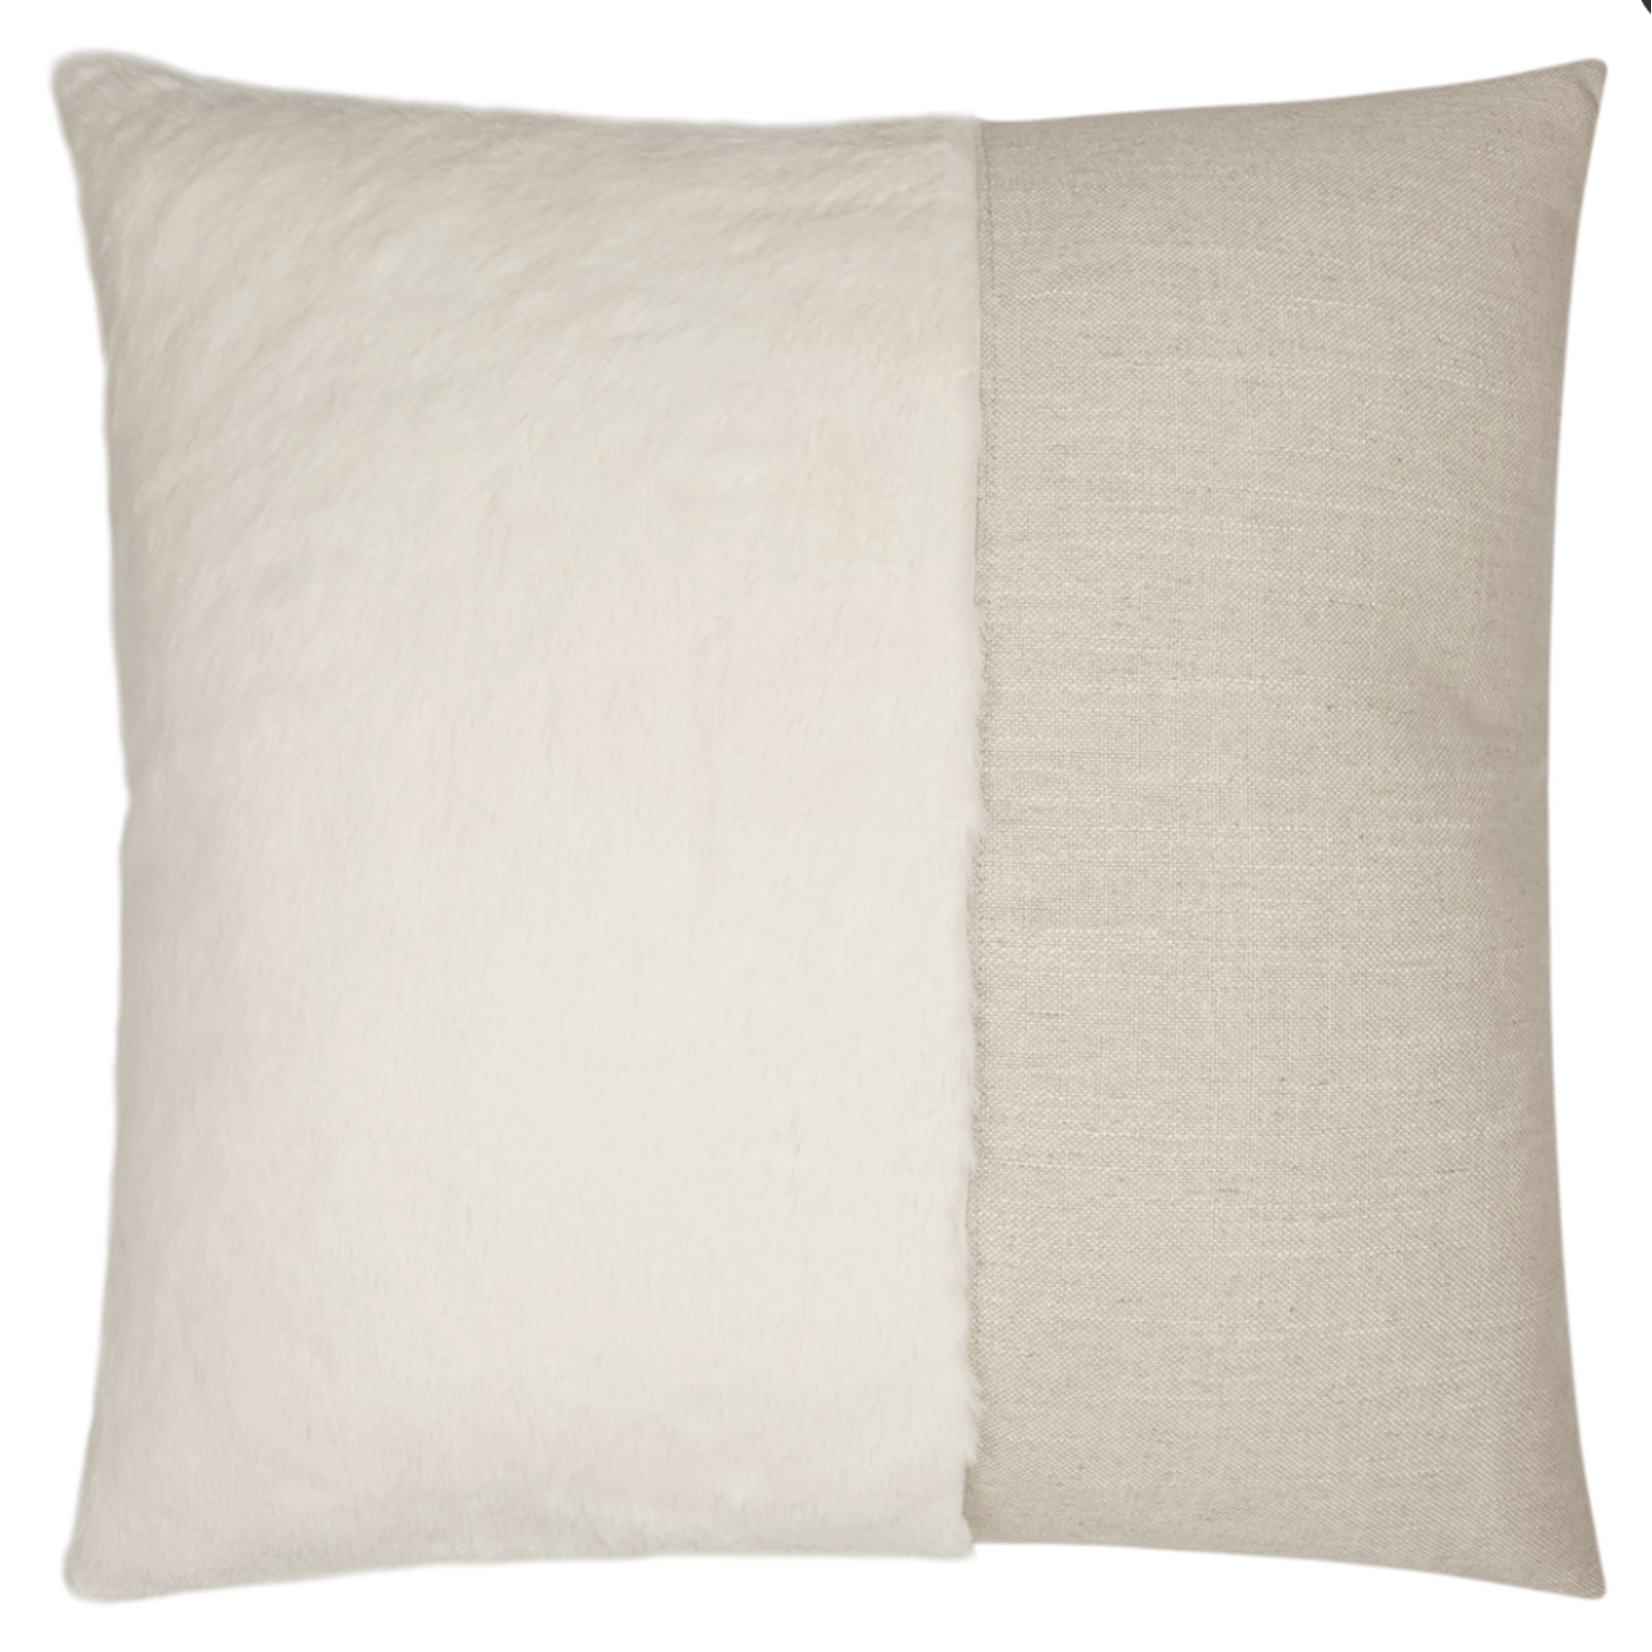 Outside The Box 24x24 St. Moritz Feather Down Pillow In Cream